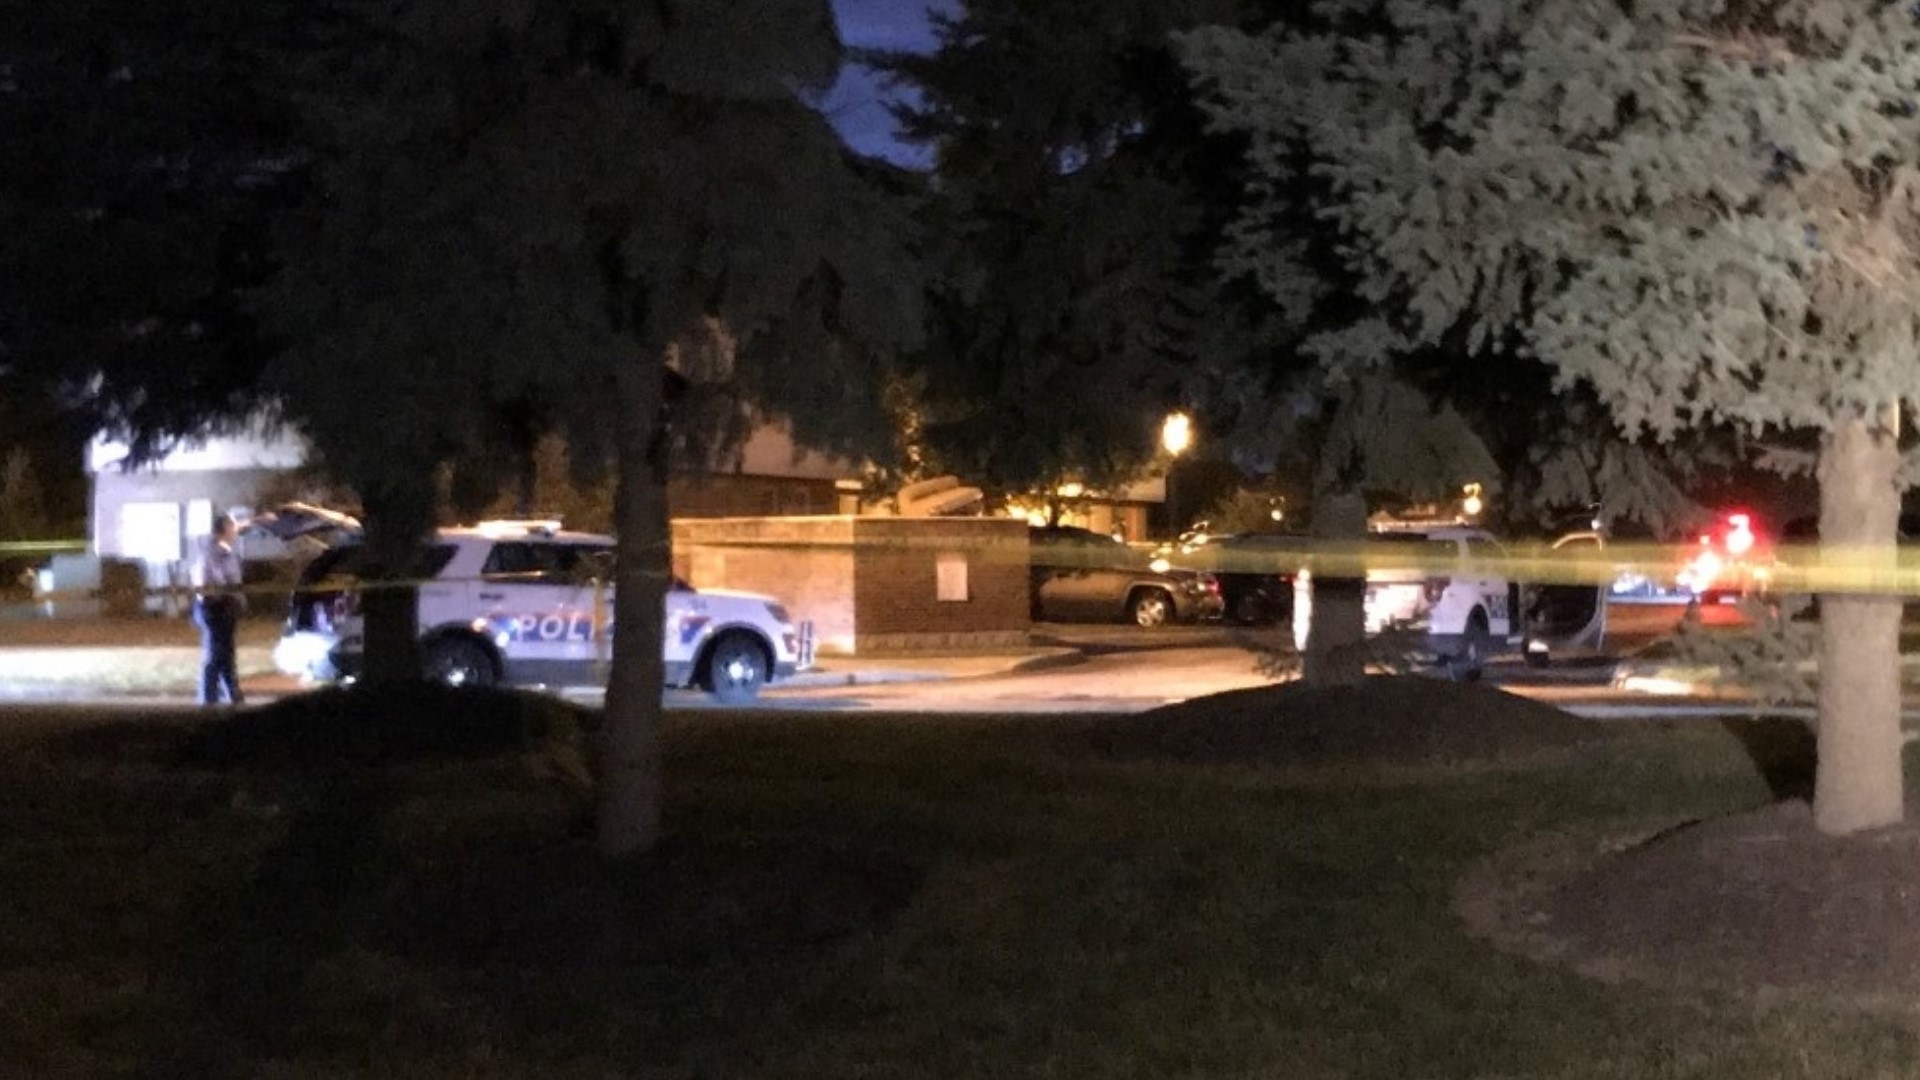 The shooting happened at an apartment complex in the 1300 block of Trailway Street near 11th Avenue in the south Linden area.